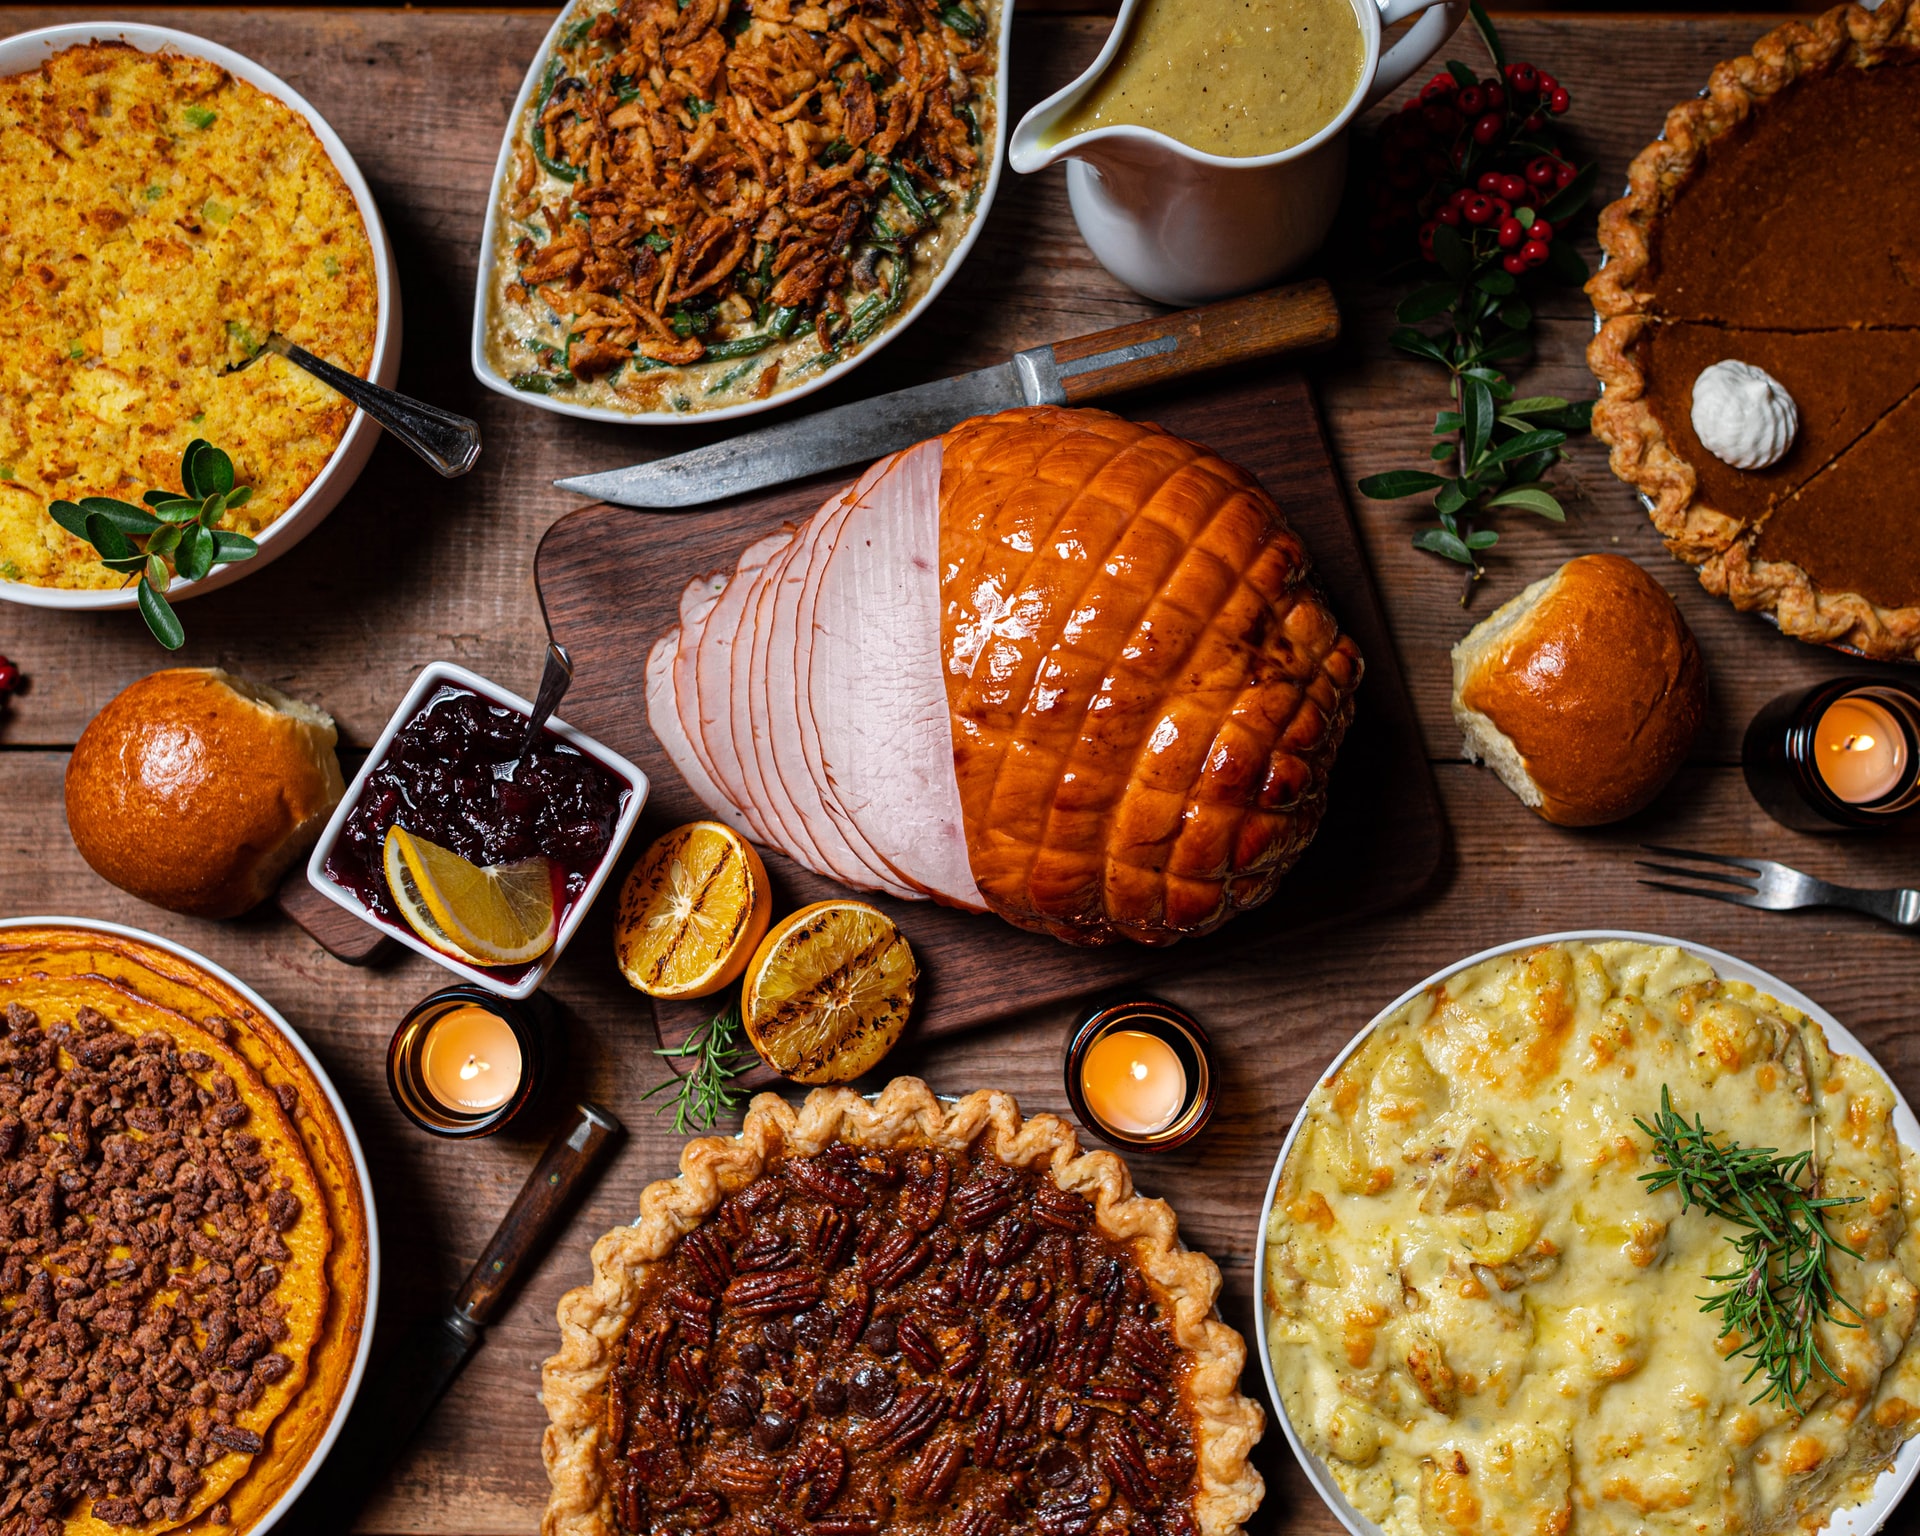 How to Host a Stress-Free, Fun-Filled Thanksgiving at Your Abingdon Apartment